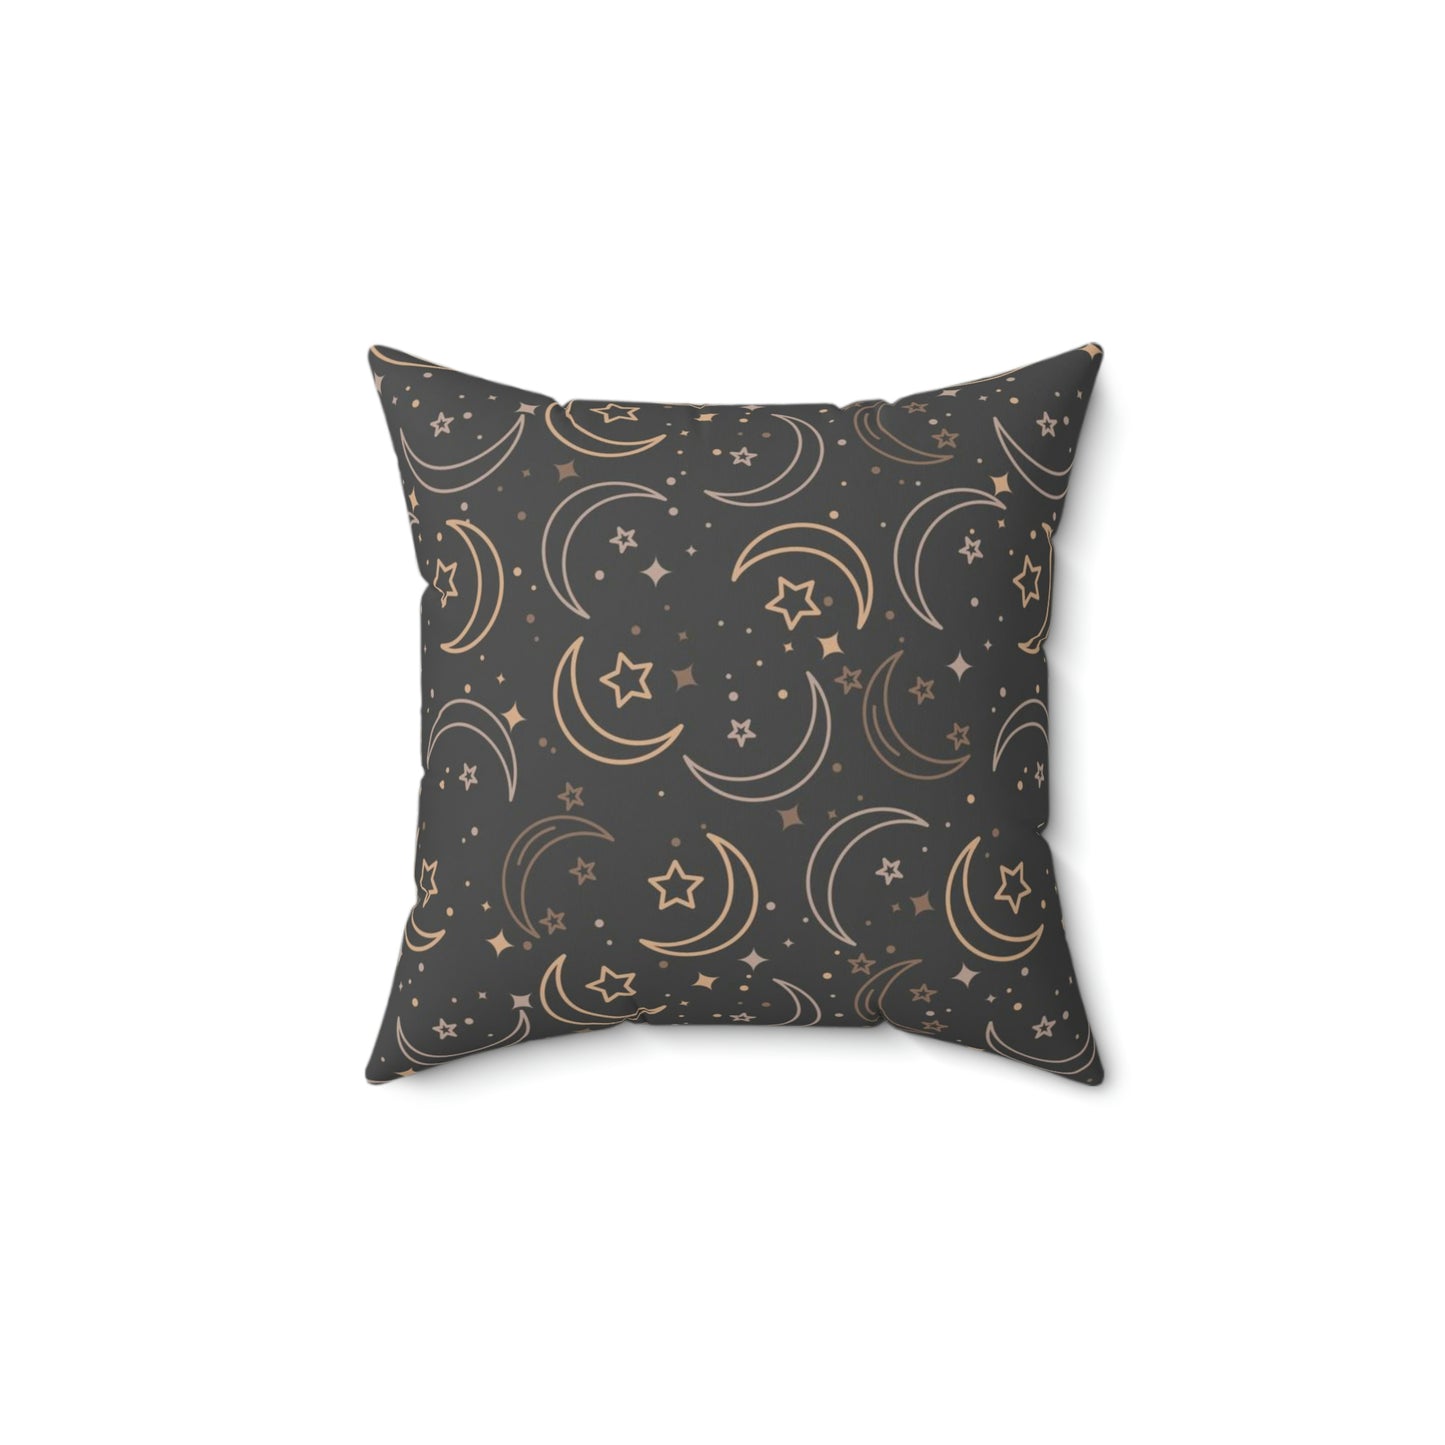 Elegant Moons Dark Gray Faux Suede Square Pillow Cover